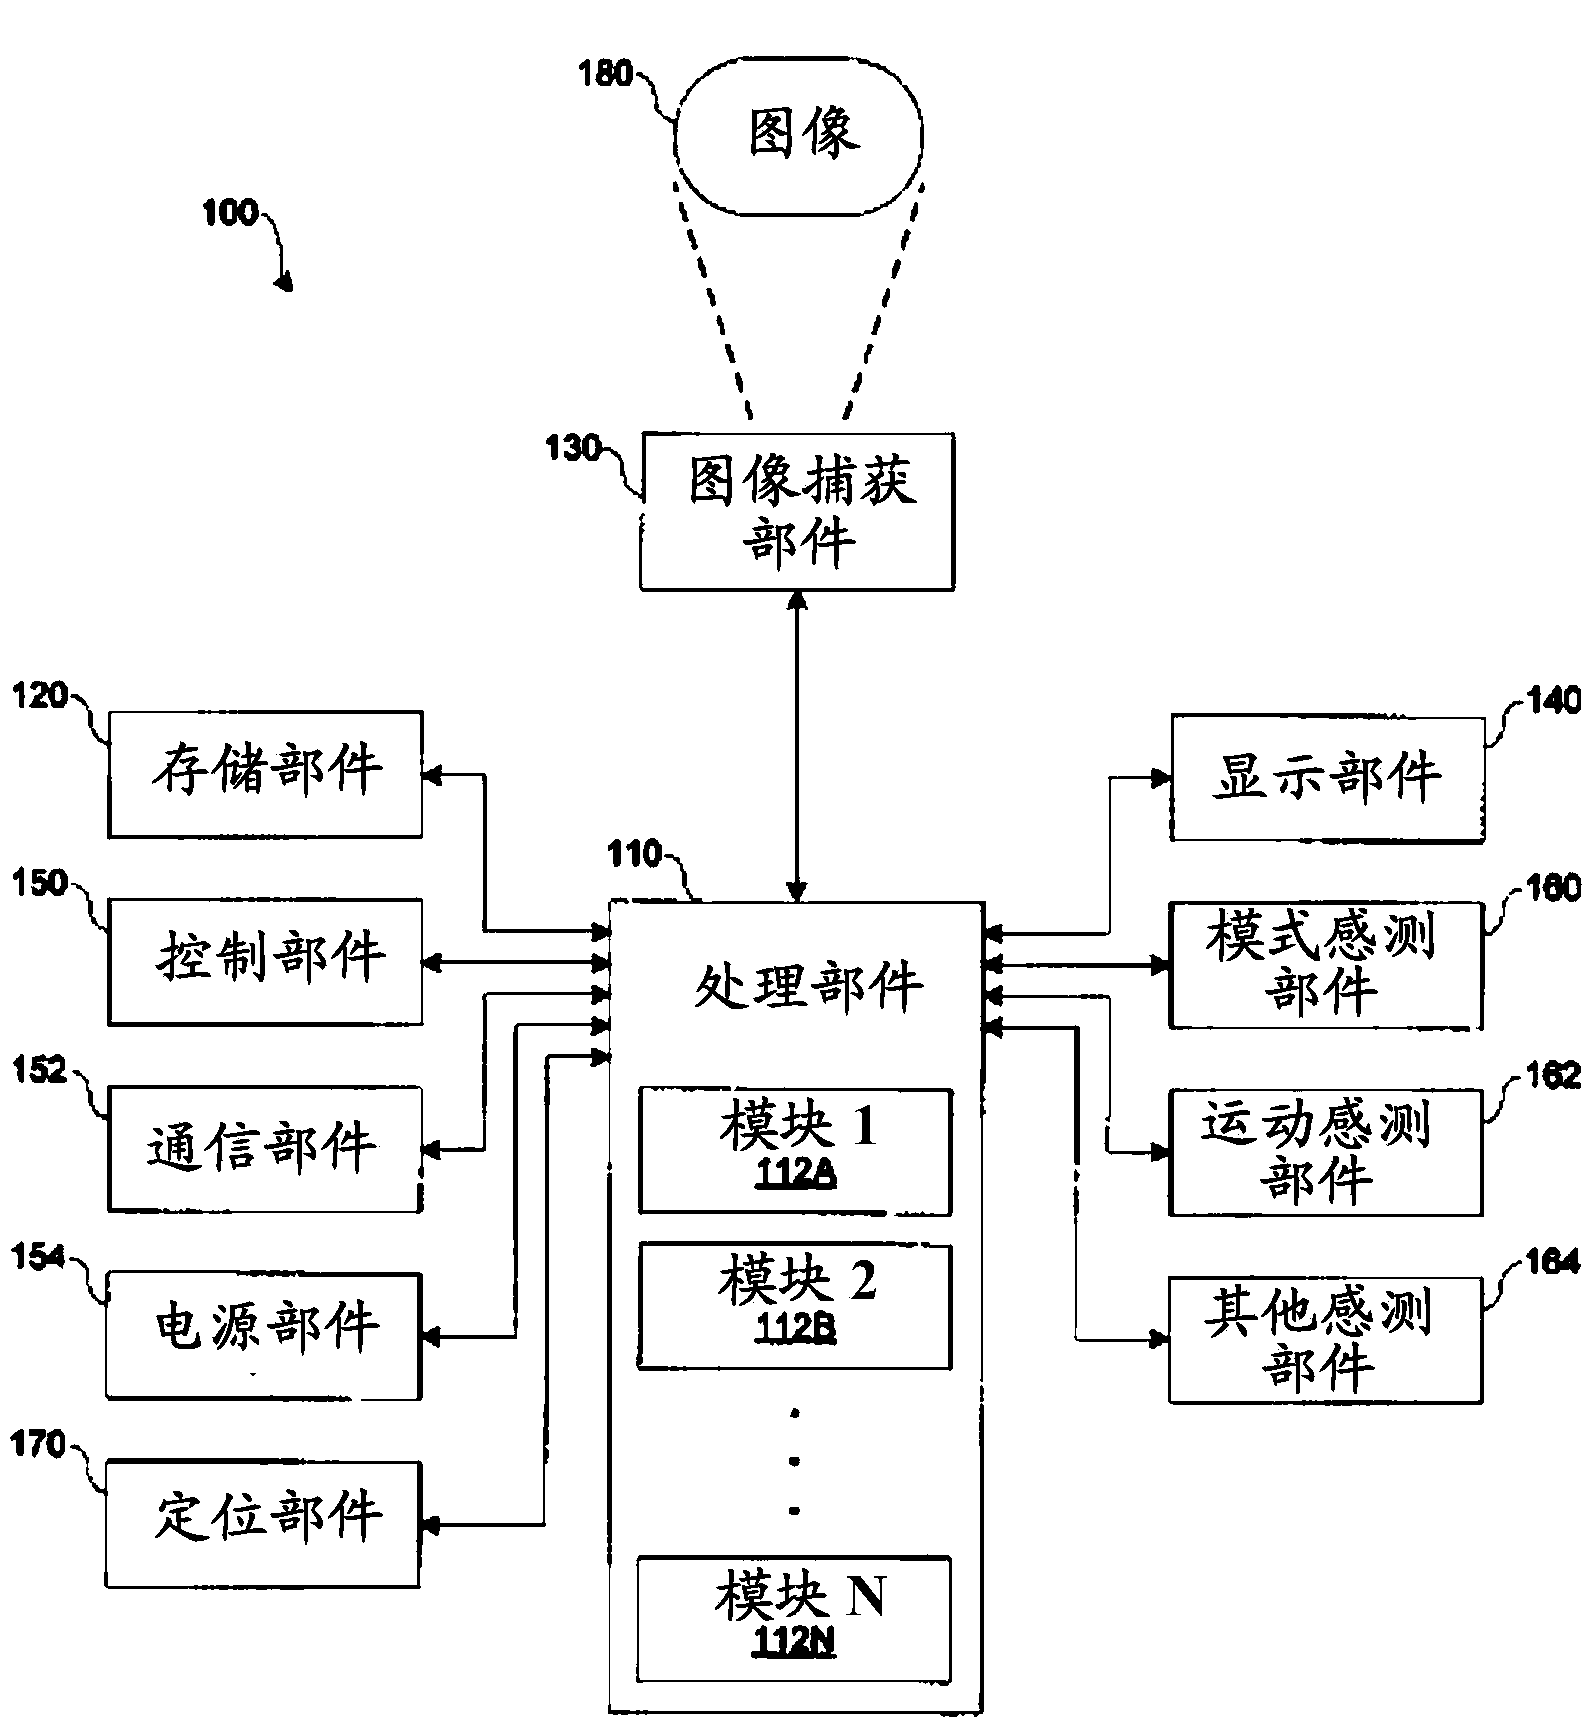 Infrared sensor systems and methods